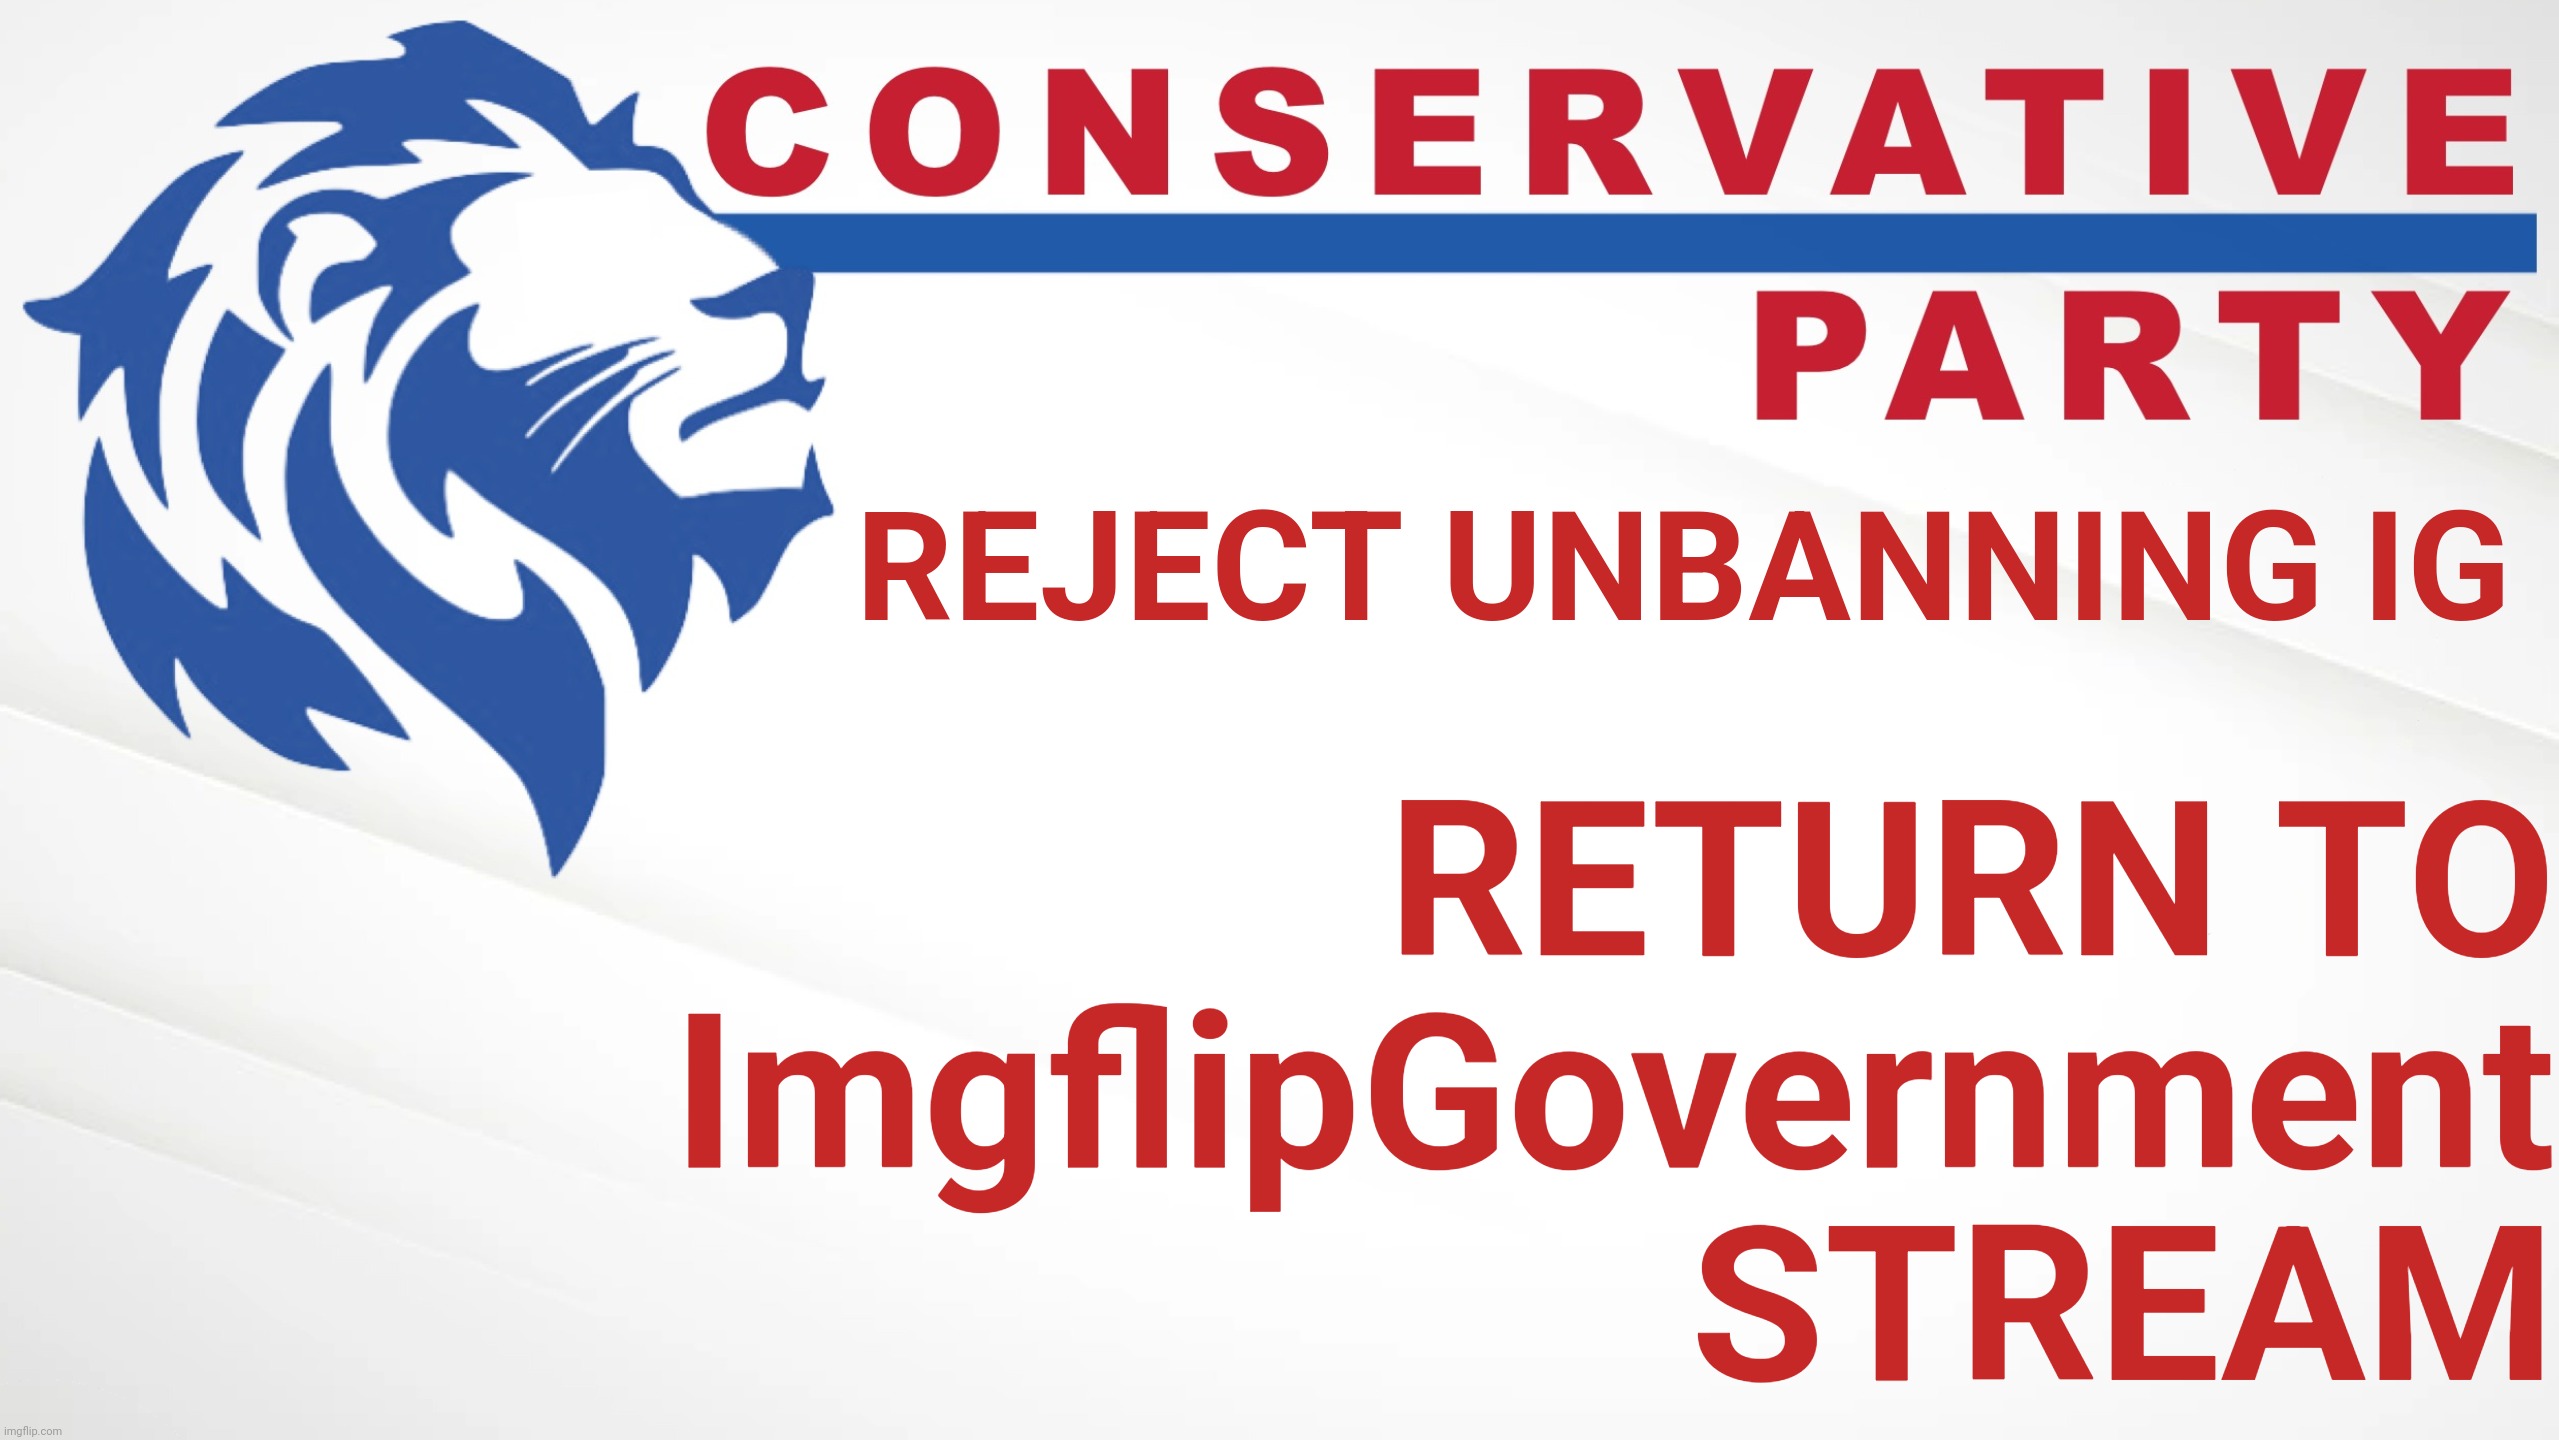 Return to ImgflipGovernment stream |  REJECT UNBANNING IG; RETURN TO
ImgflipGovernment
STREAM | image tagged in conservative party of imgflip is blind,ban,unban,reban,unreban,rayban | made w/ Imgflip meme maker